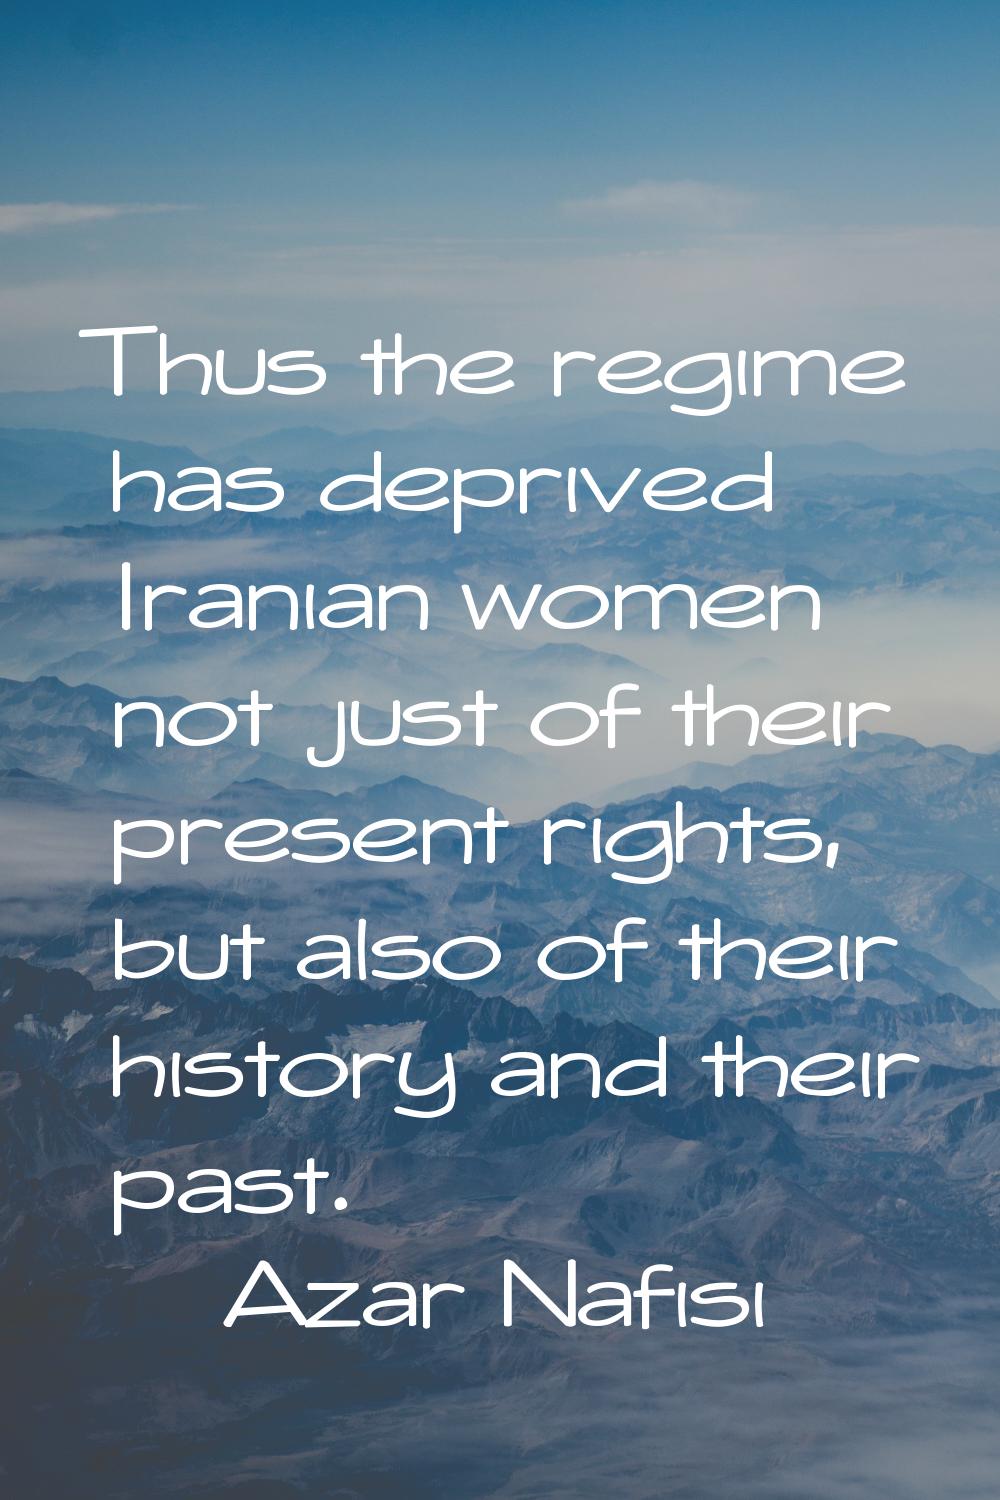 Thus the regime has deprived Iranian women not just of their present rights, but also of their hist